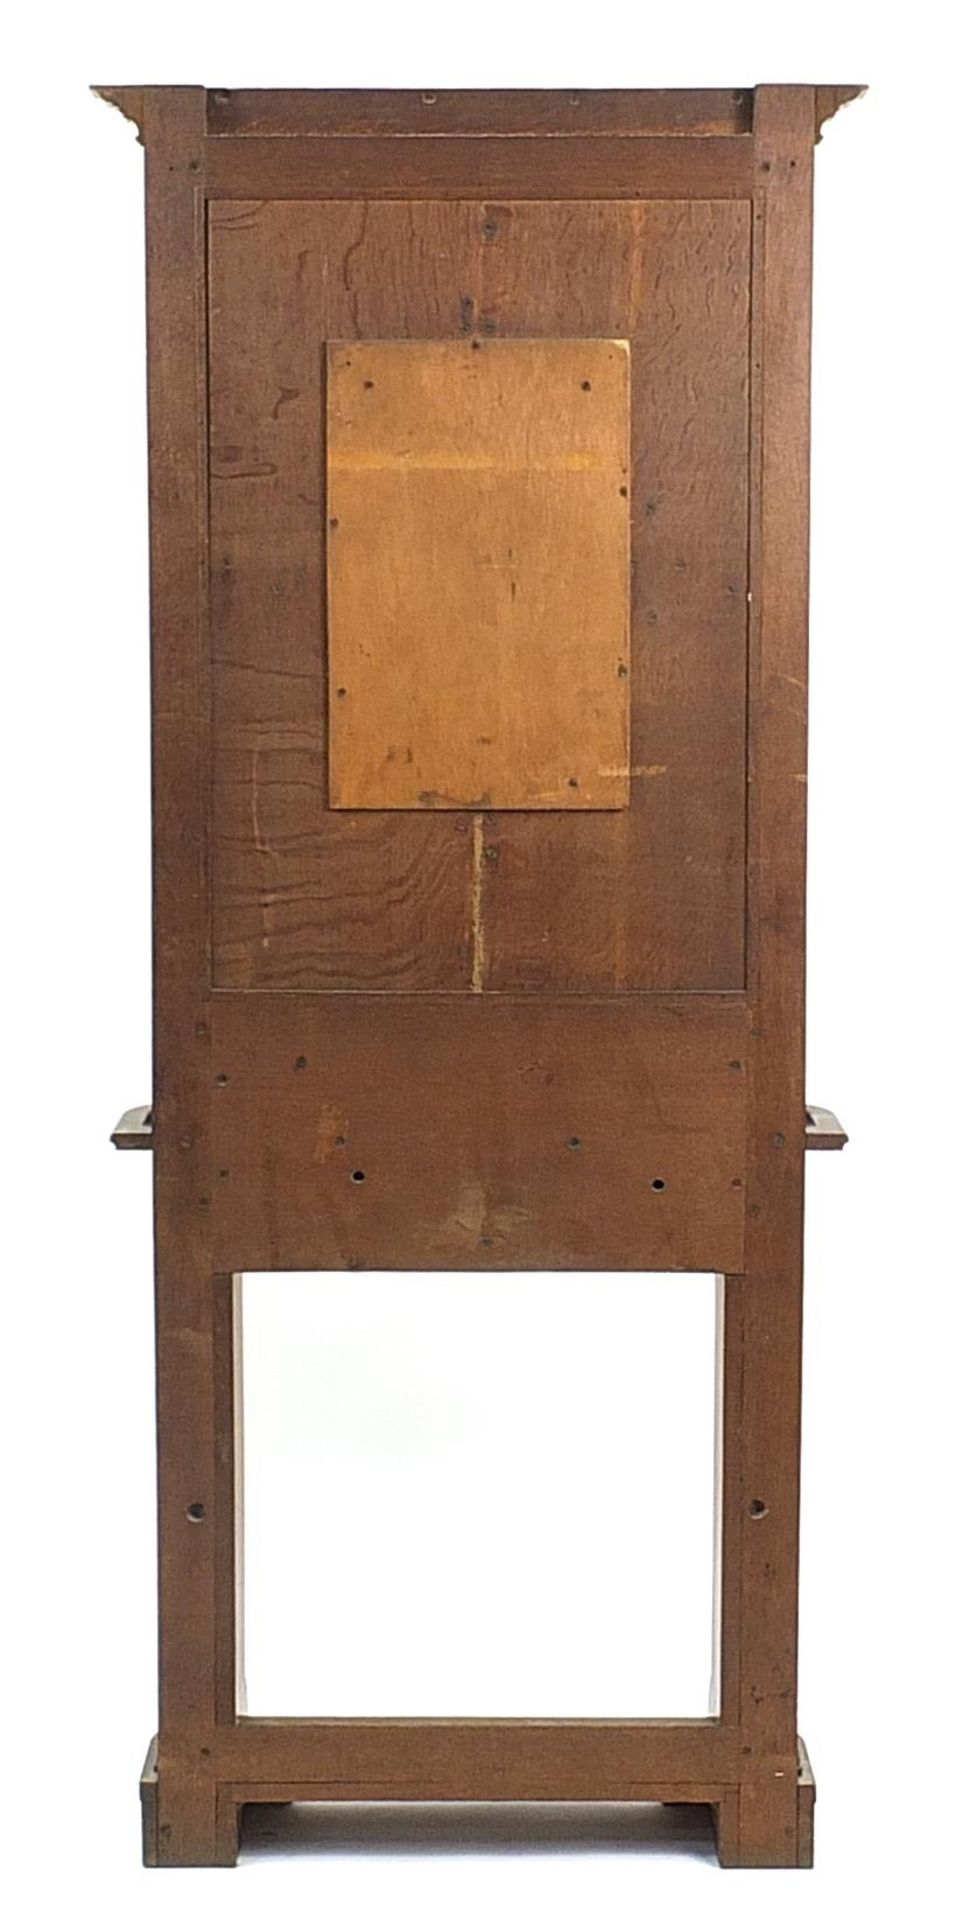 Oak hall stand with mirrored back and brass hooks, 198cm H x 84cm W x 23cm D - Image 2 of 2